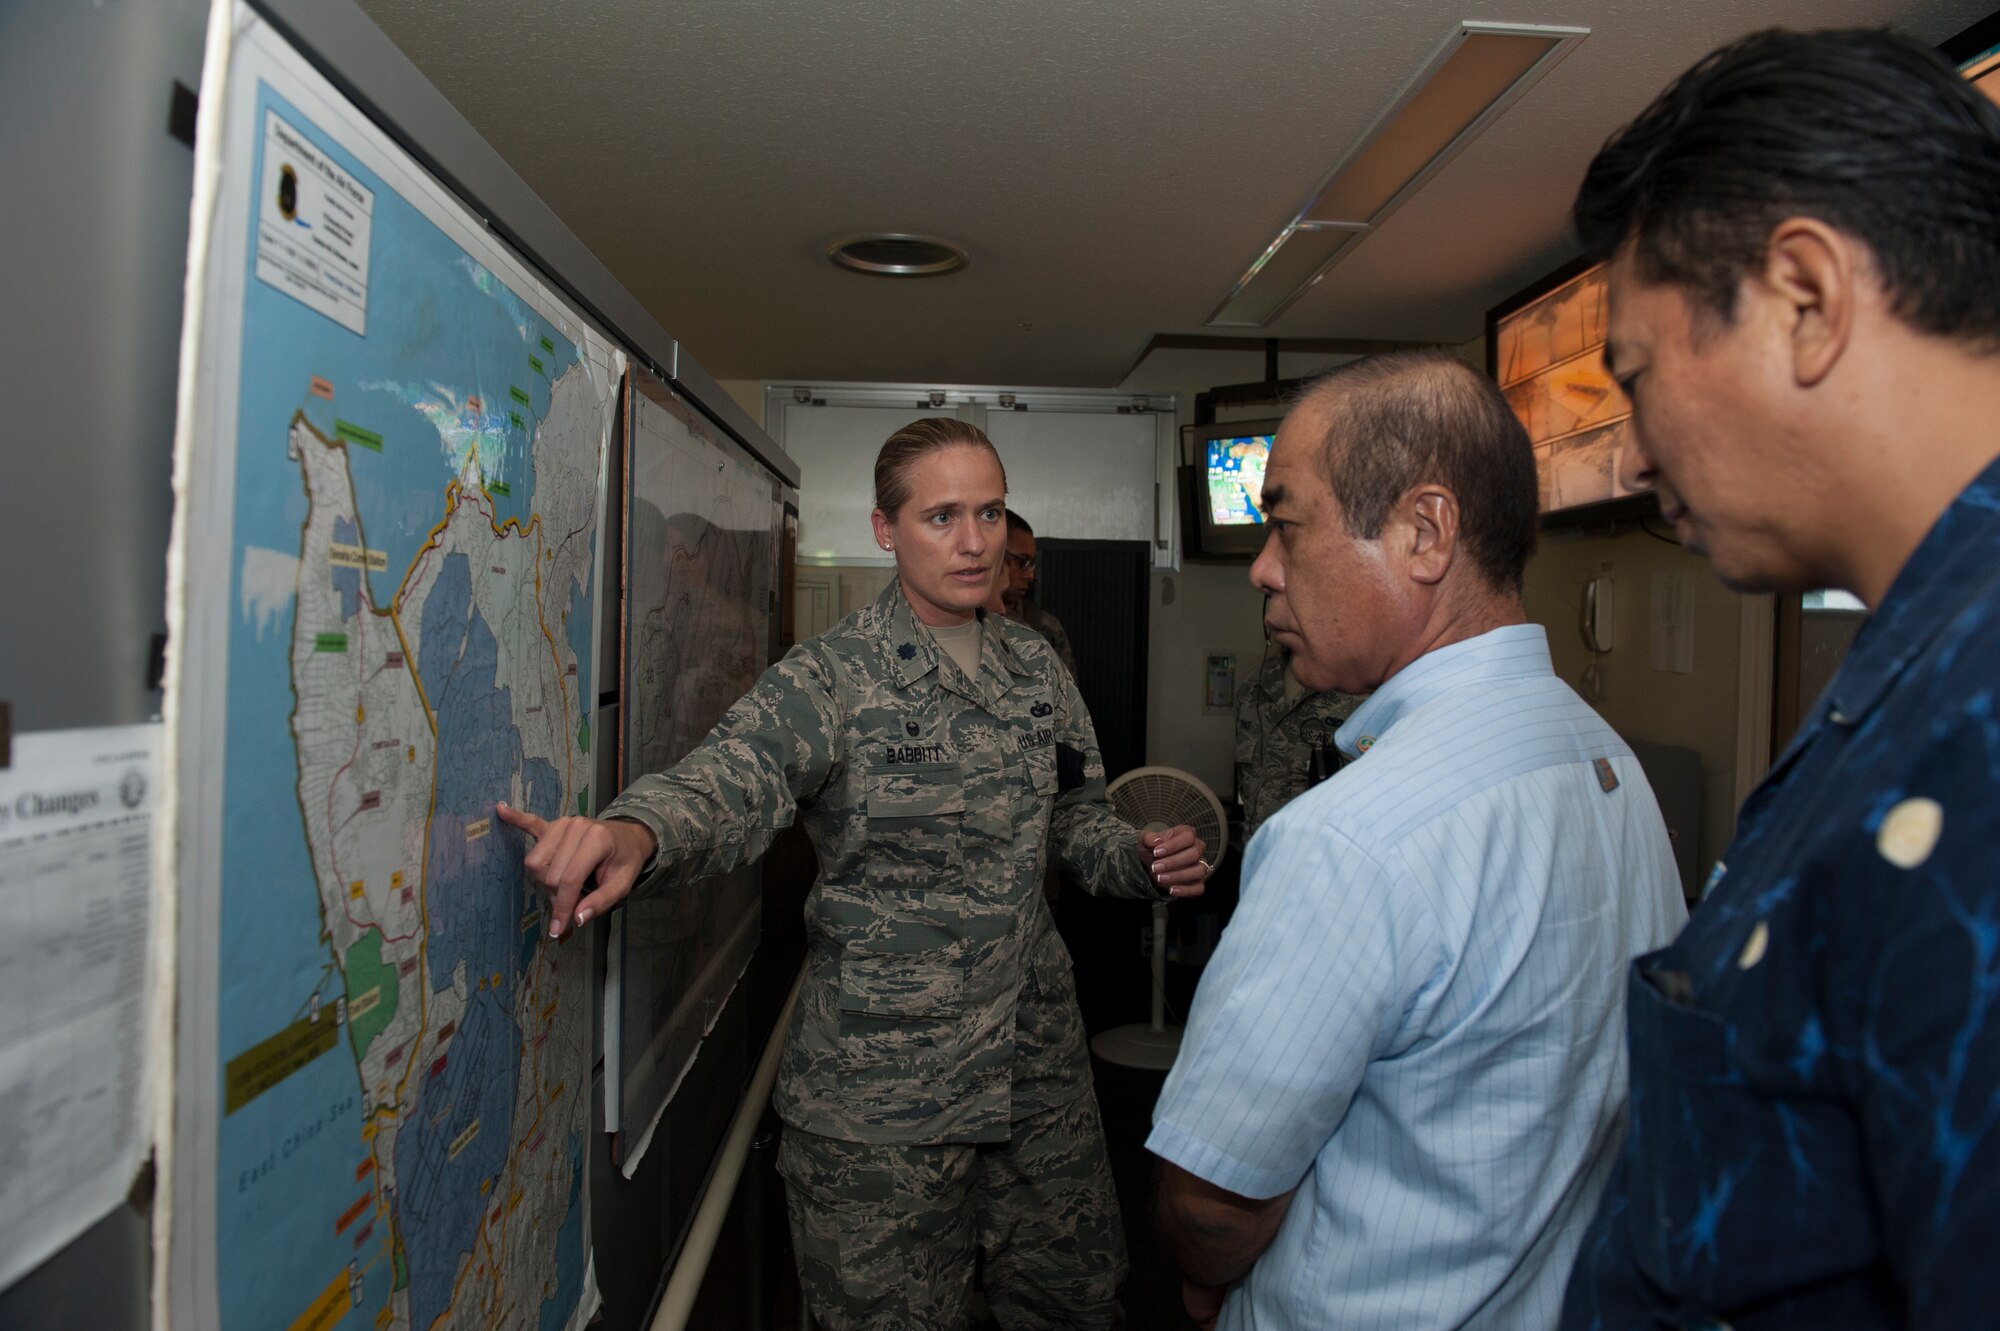 U.S. Air Force Lt. Col. Sarah Babbitt, 18th Security Forces Squadron commander, explains a jurisdiction map to Hajime Shinzato, Chief of Okinawa Police Station and Kazumune Namizato, Okinawa Police Station senior foreign case investigator, during the Inaugural Law Enforcement Officer Exchange Oct. 22, 2015, on Kadena Air Base, Japan. The map displays where our military forces have authority on Okinawa. (U.S. Air Force photo by Airman 1st Class Lynette M. Rolen)